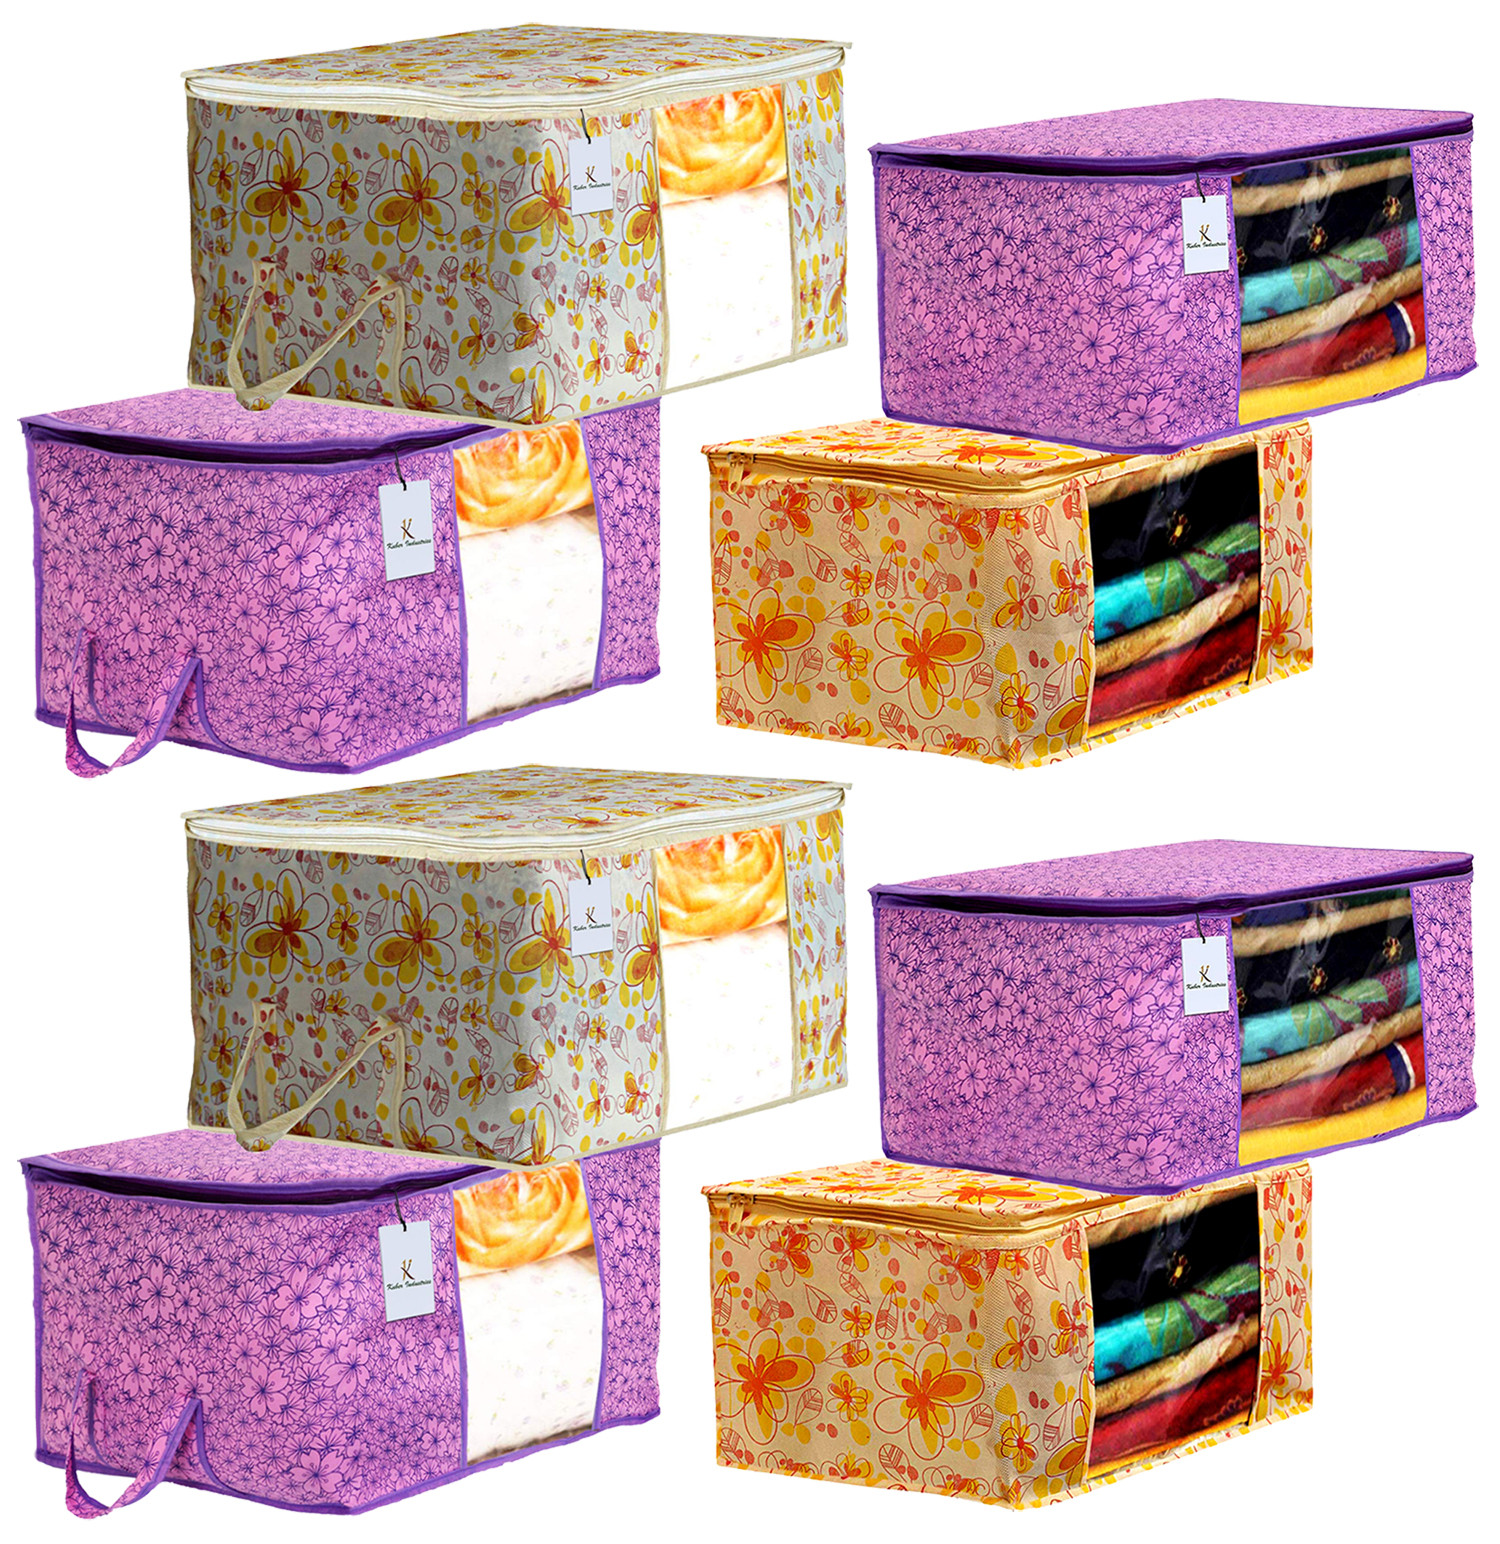 Kuber Industries Metalic Printed Non Woven Saree Cover And Underbed Storage Bag, Storage Organiser, Blanket Cover, Pink Purple & Ivory Red  -CTKTC42381